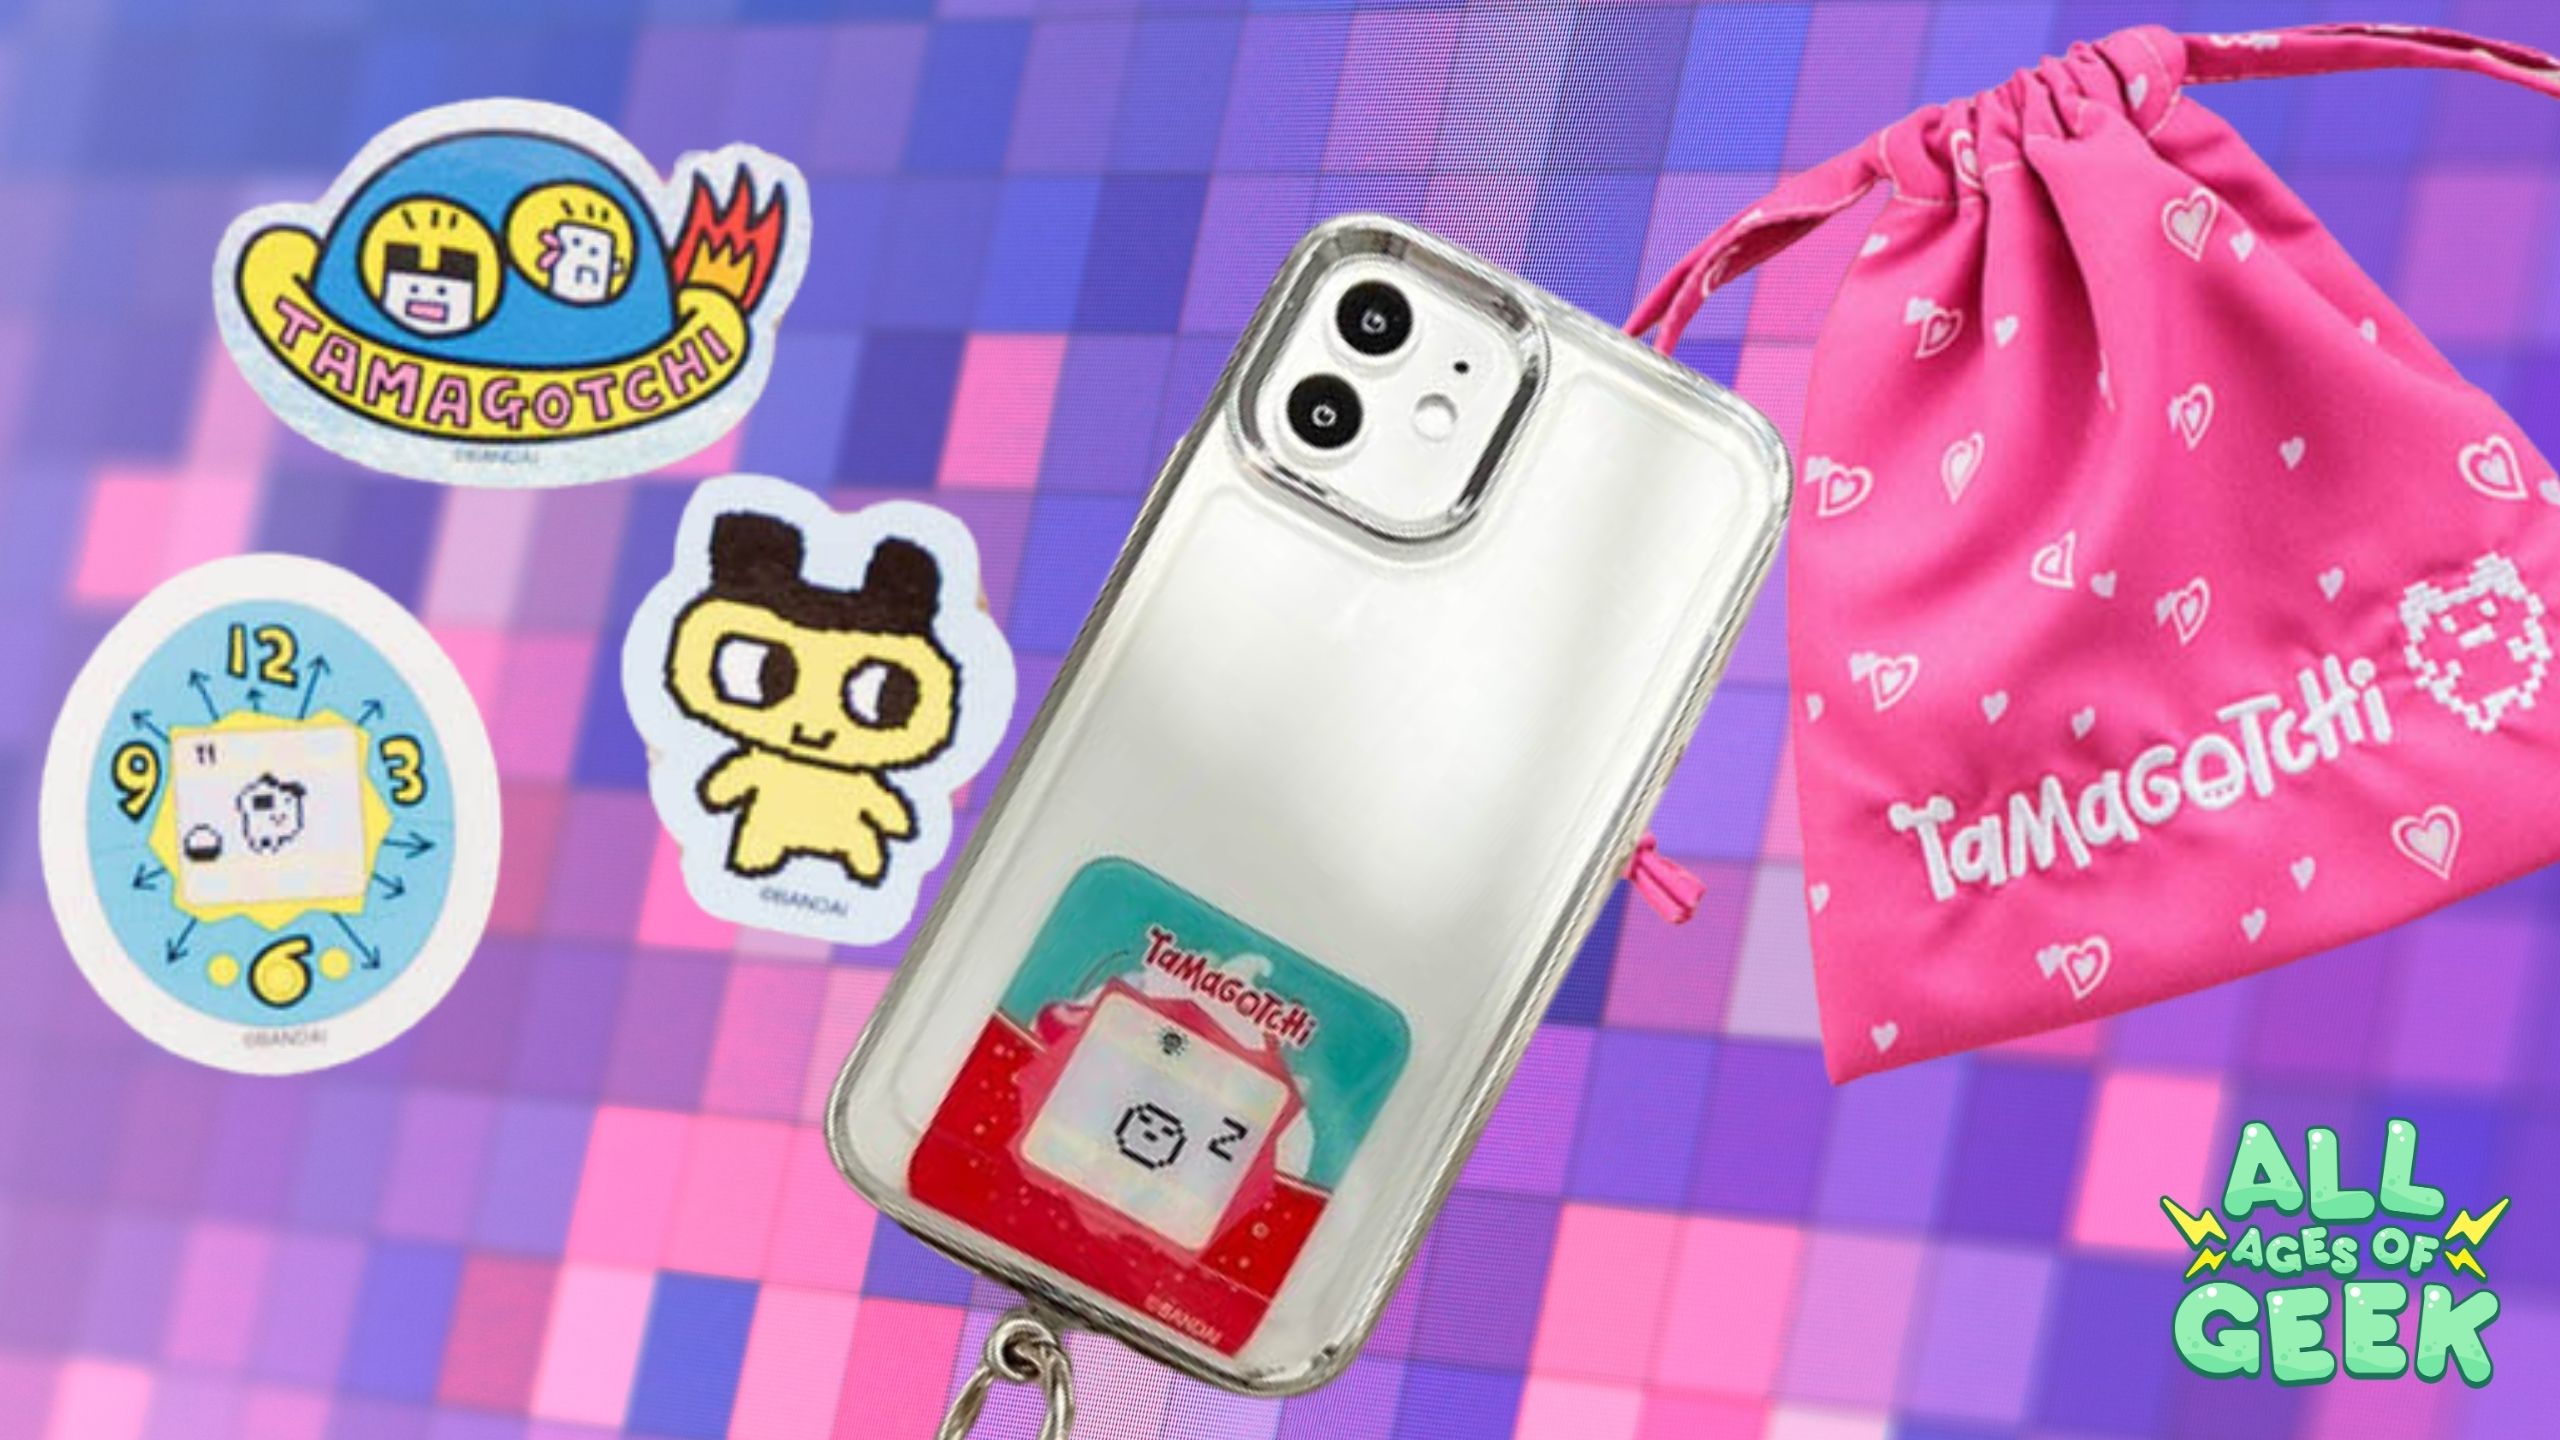 Lowrys Farm and Tamagotchi Team Up for Adorable Accessories!